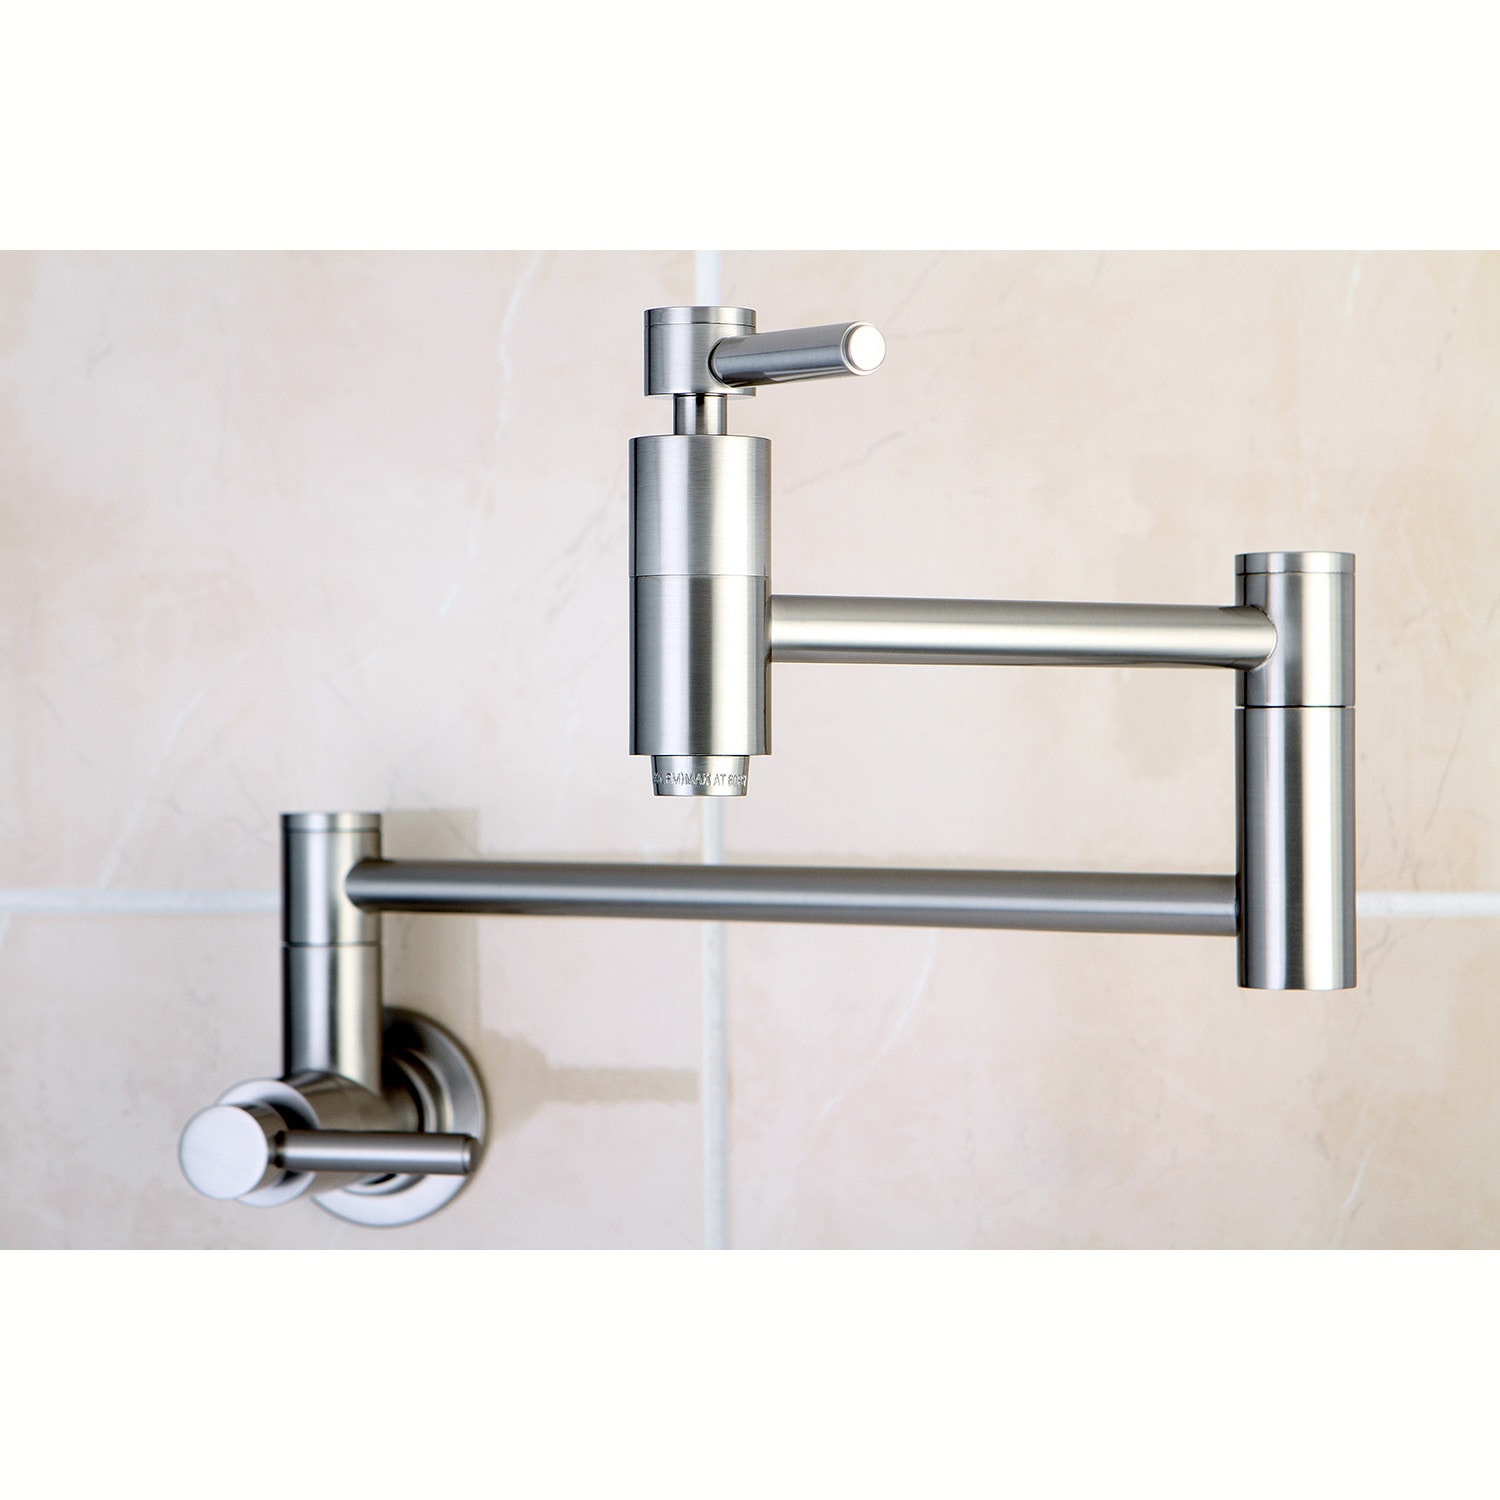 Kingston Brass LS8628DL Concord Pull-Down Kitchen Faucet 8-5/16 in Spout Reach Satin Nickel